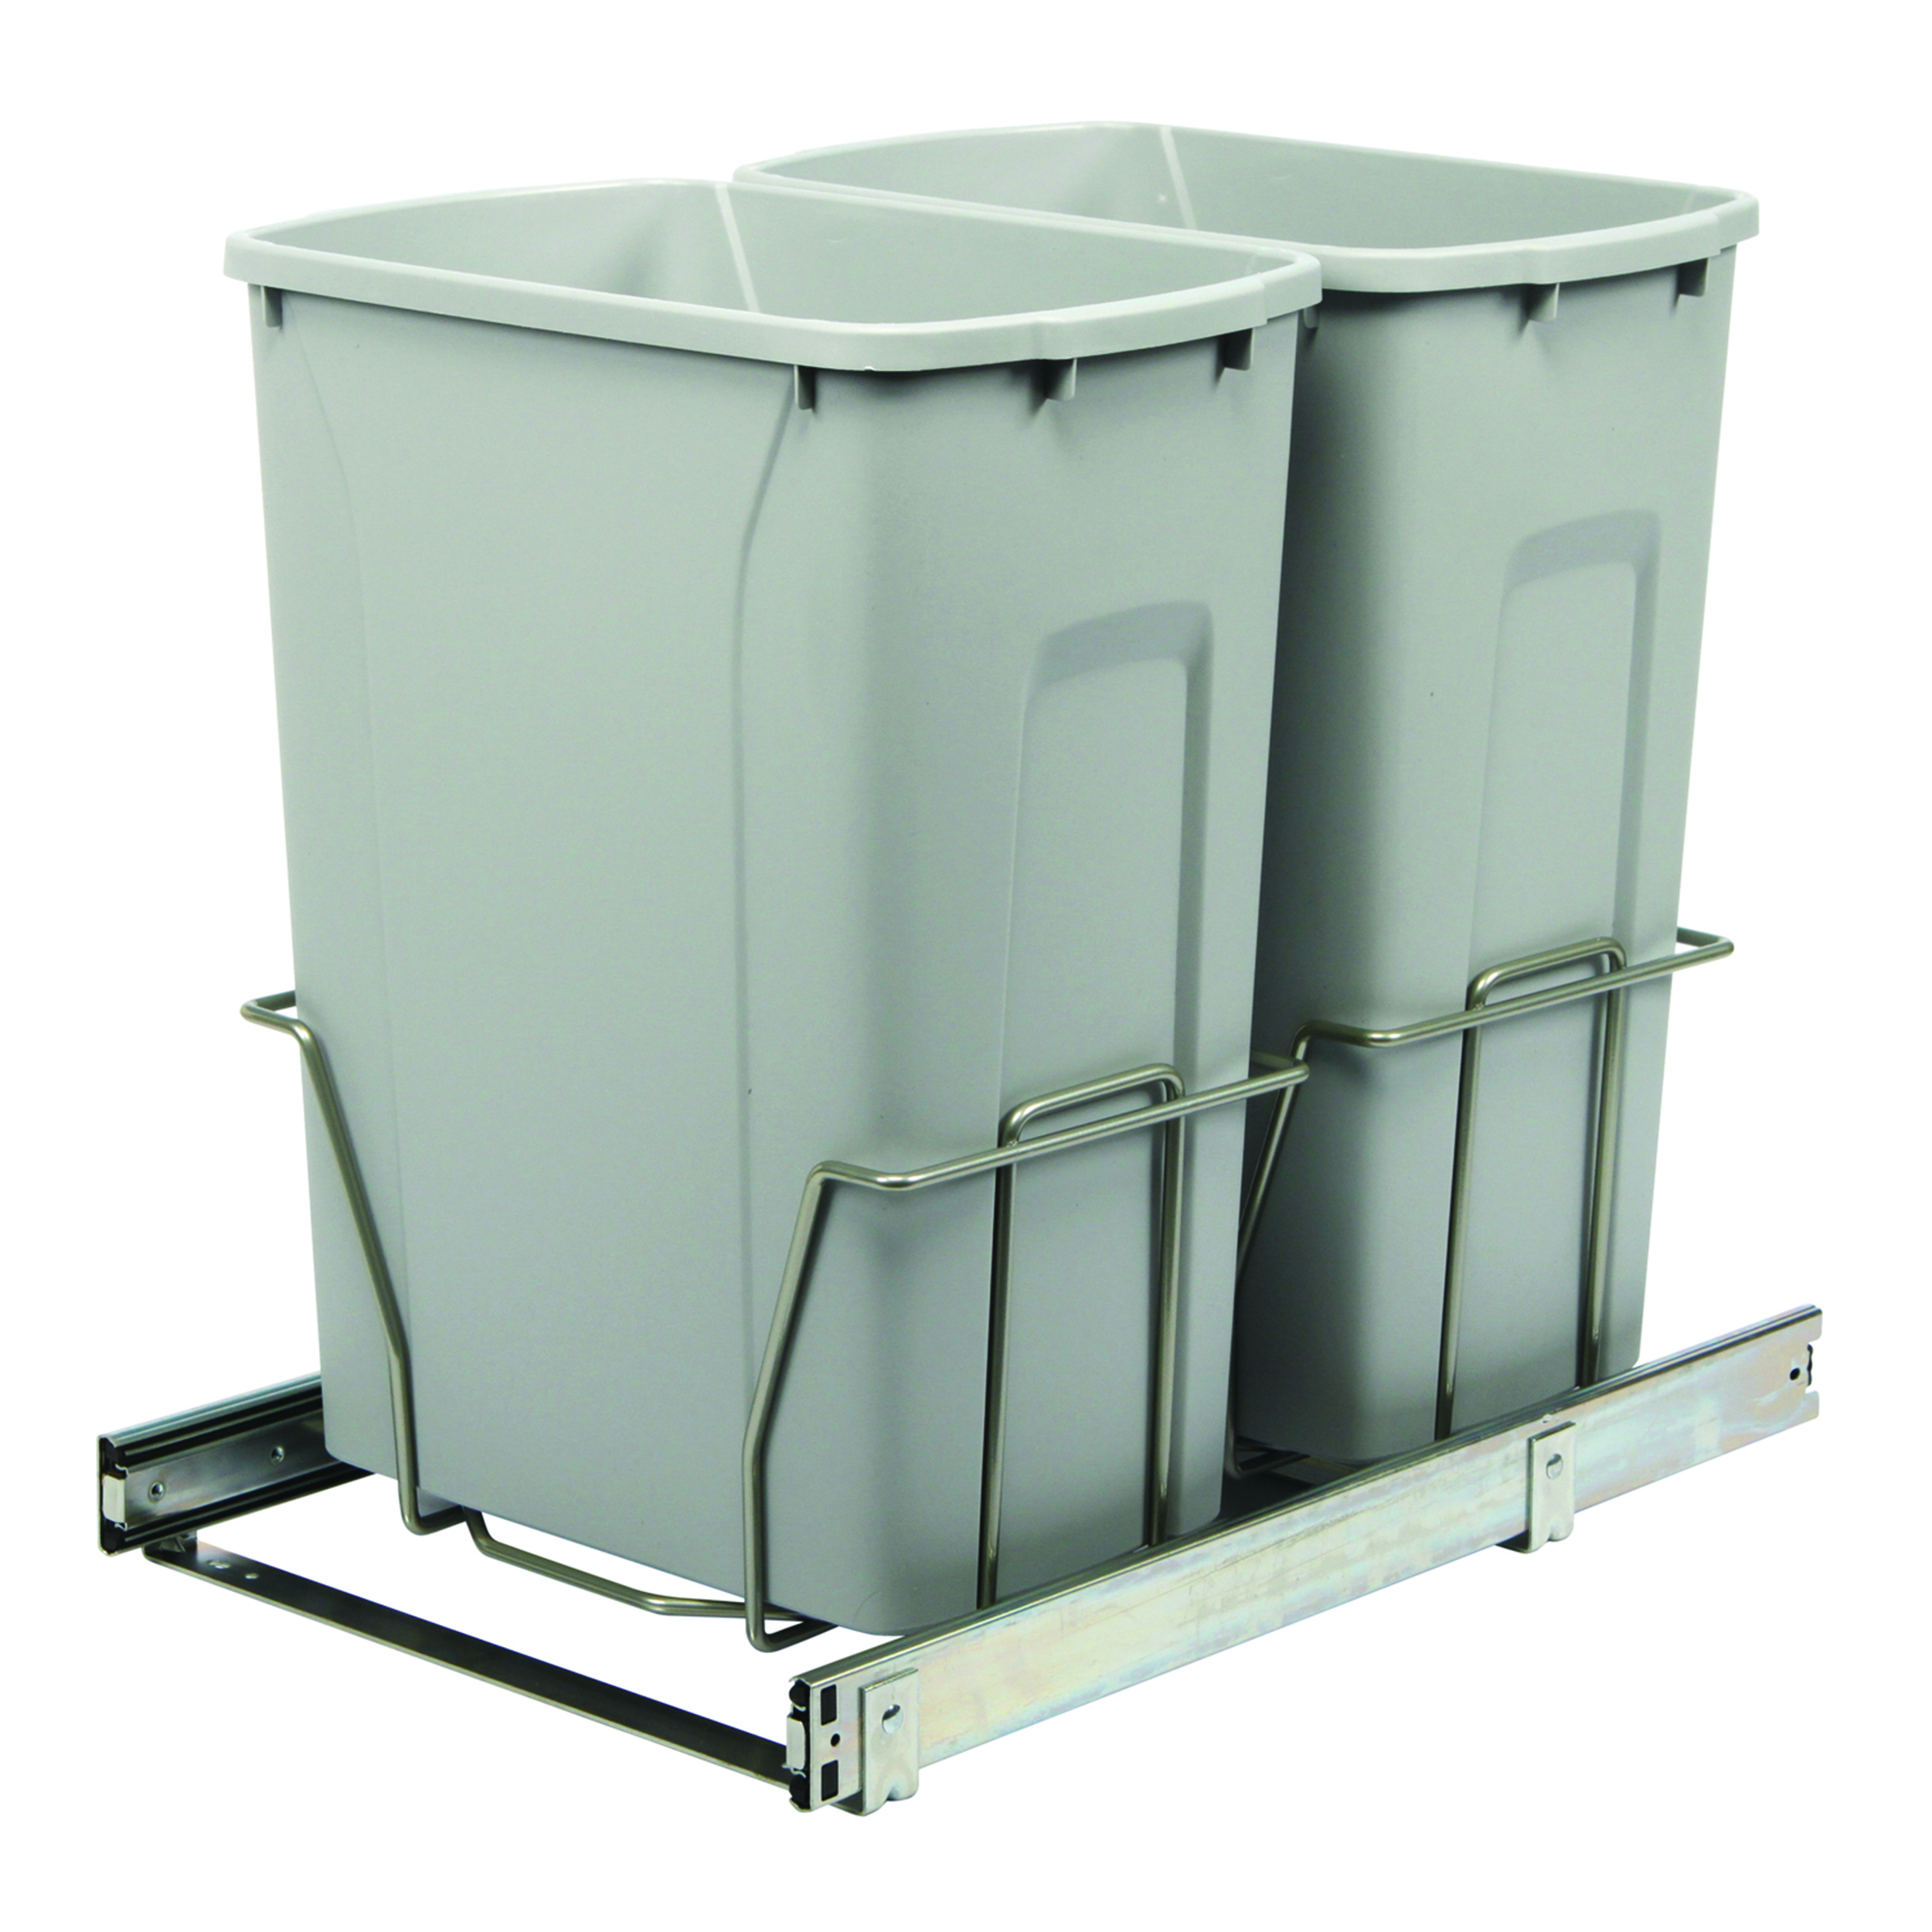 Real Solutions Double 35qt Pull-out Waste & Recyling Unit, Platinum